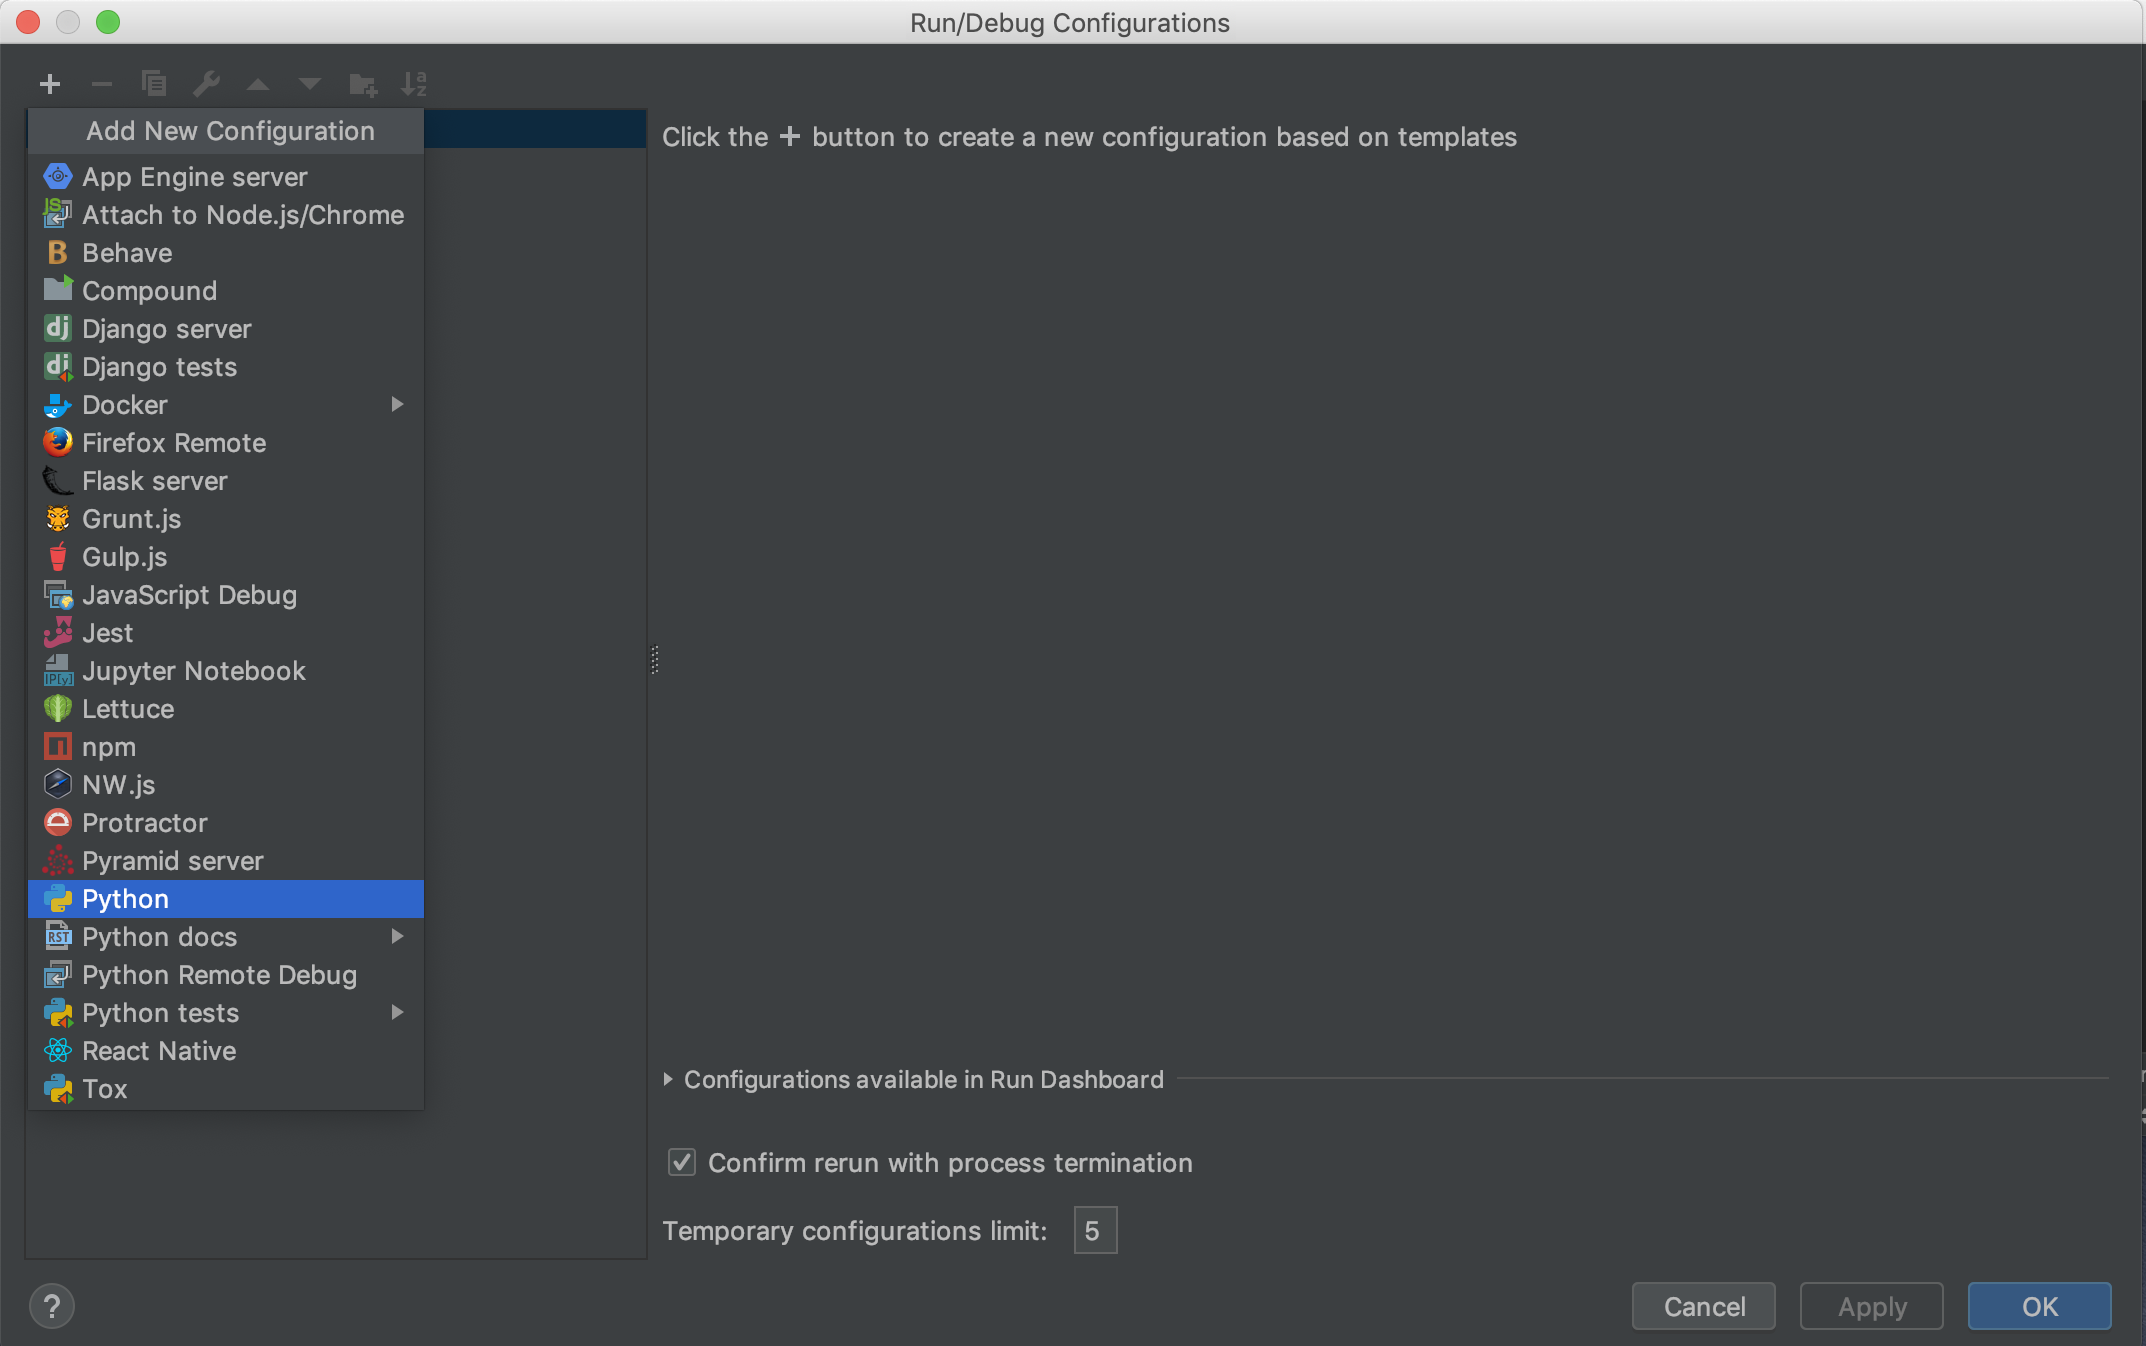 visual studio community edition for mac support for python